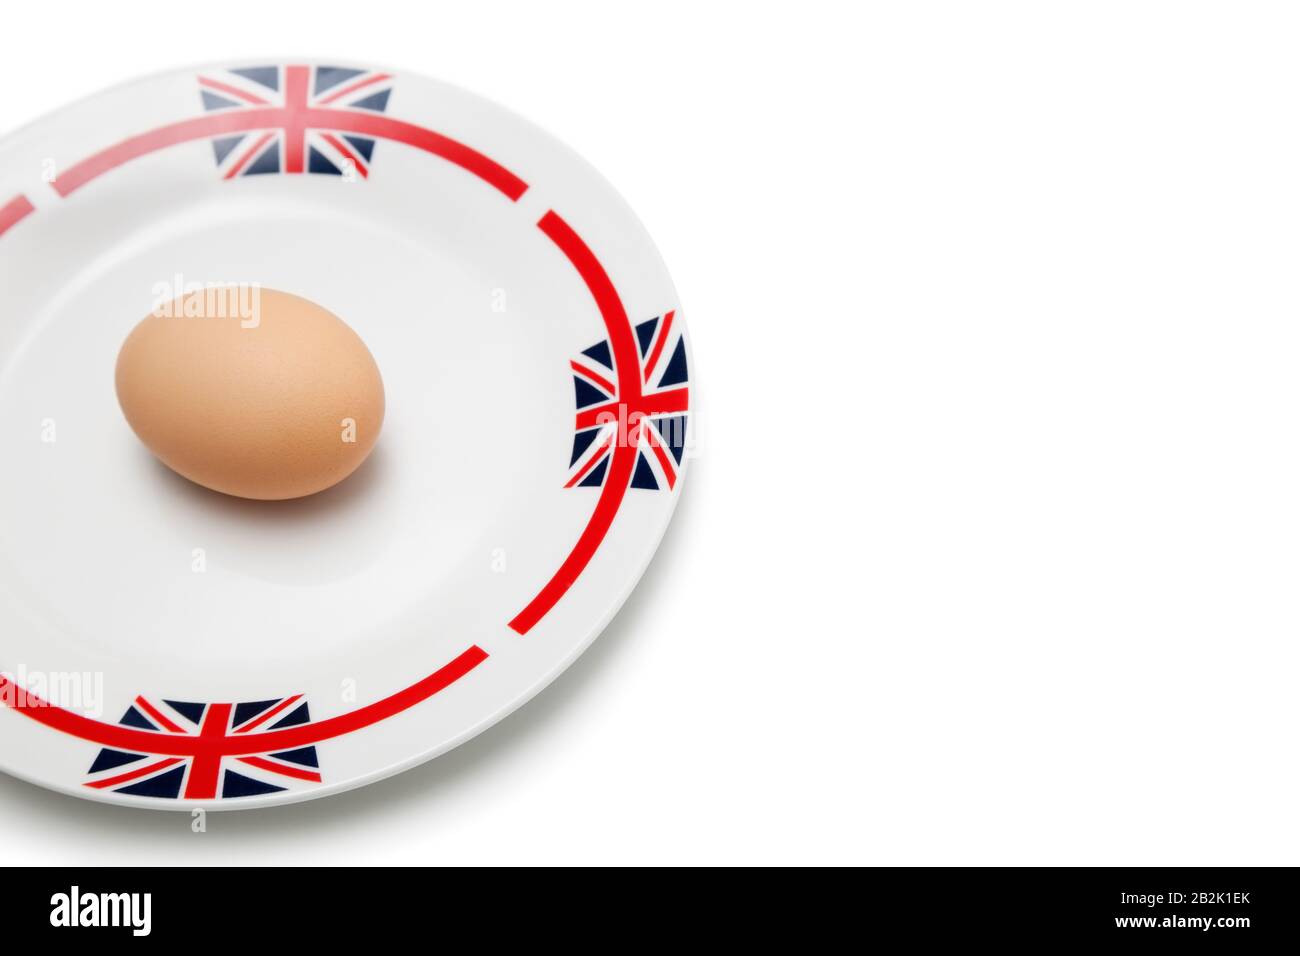 Brown egg in plate over white background Stock Photo